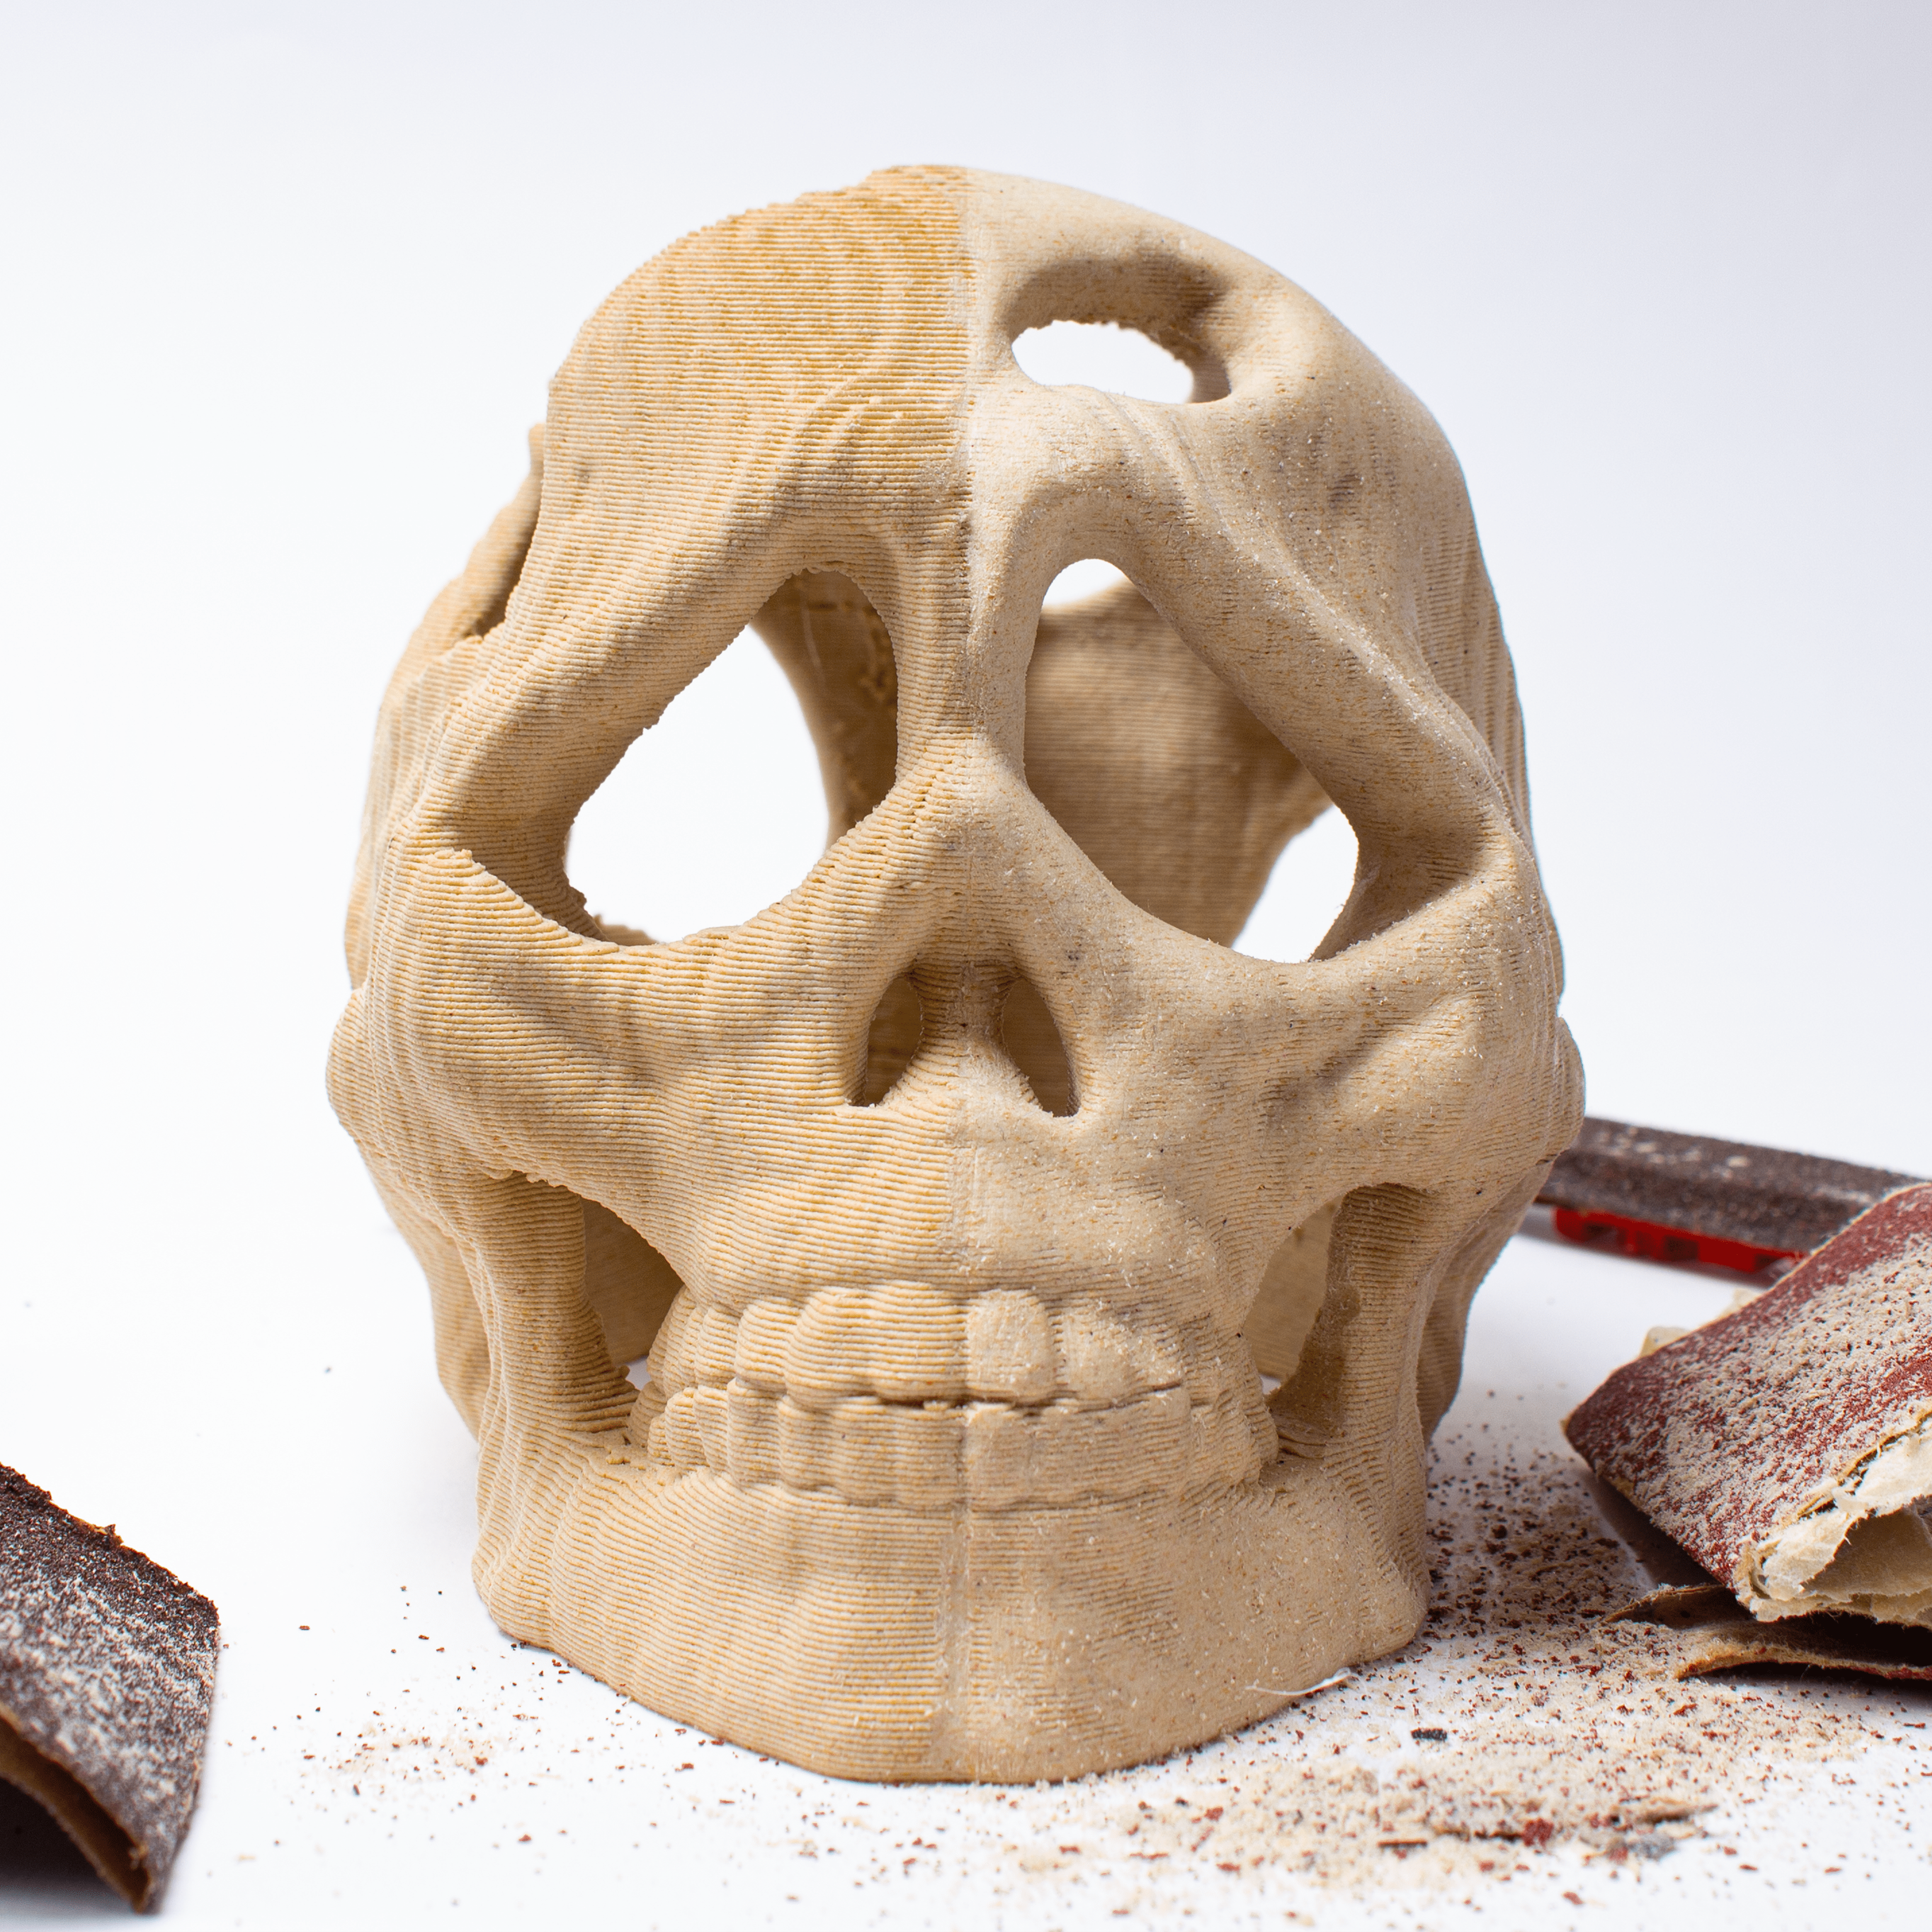 A 3D printed skull being sanded